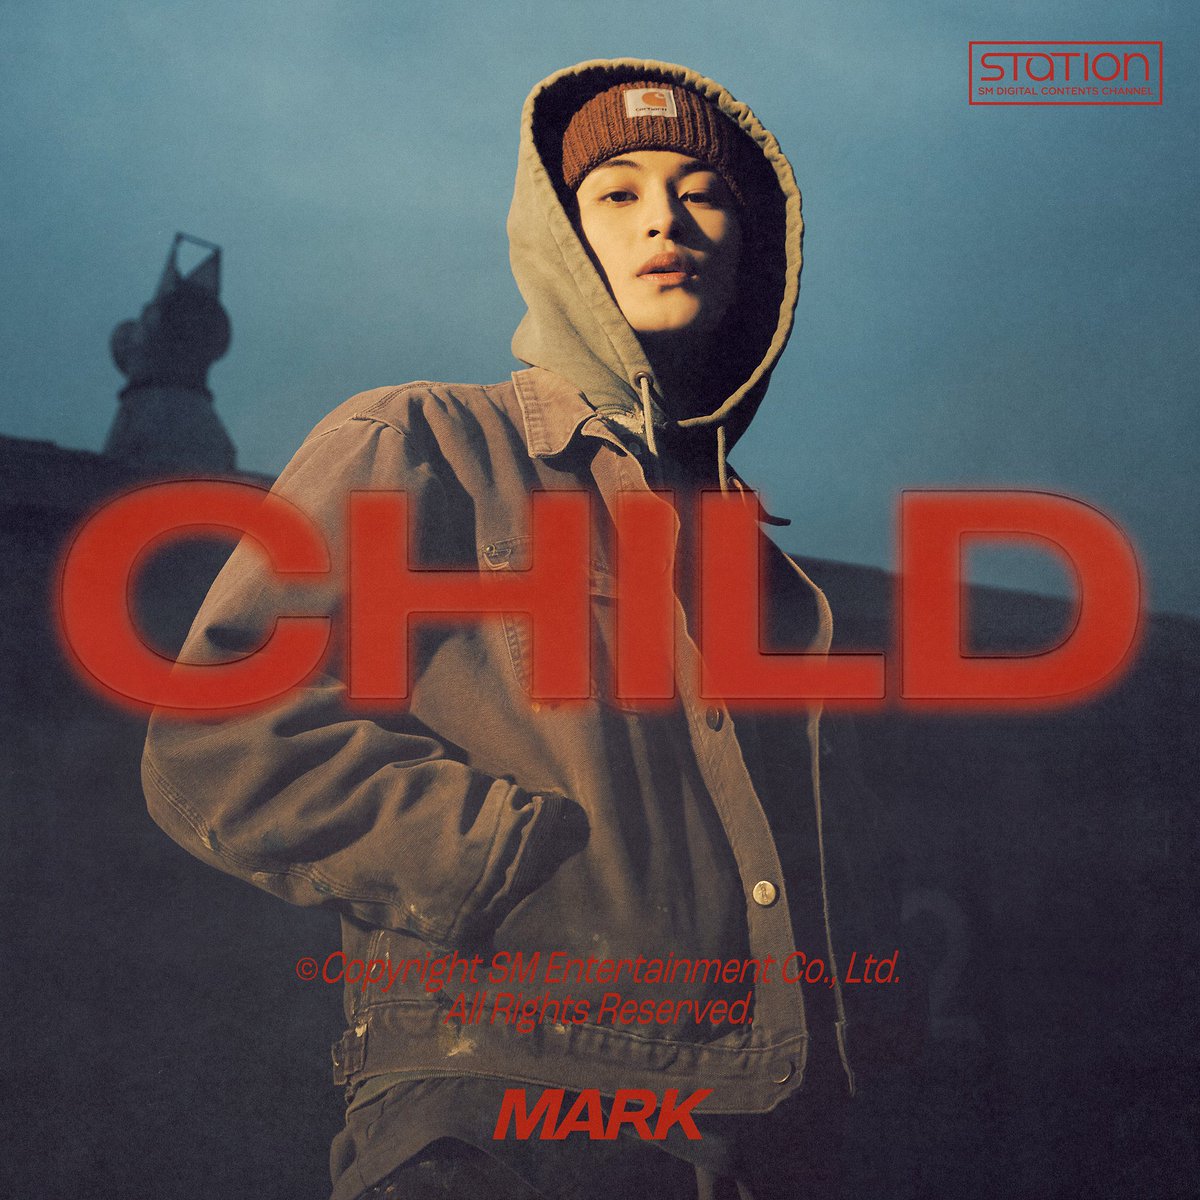 RT @nctcharts_: “Child” by #MARK has entered MelOn TOP100 TOP 10! https://t.co/QcVVbnZZjQ